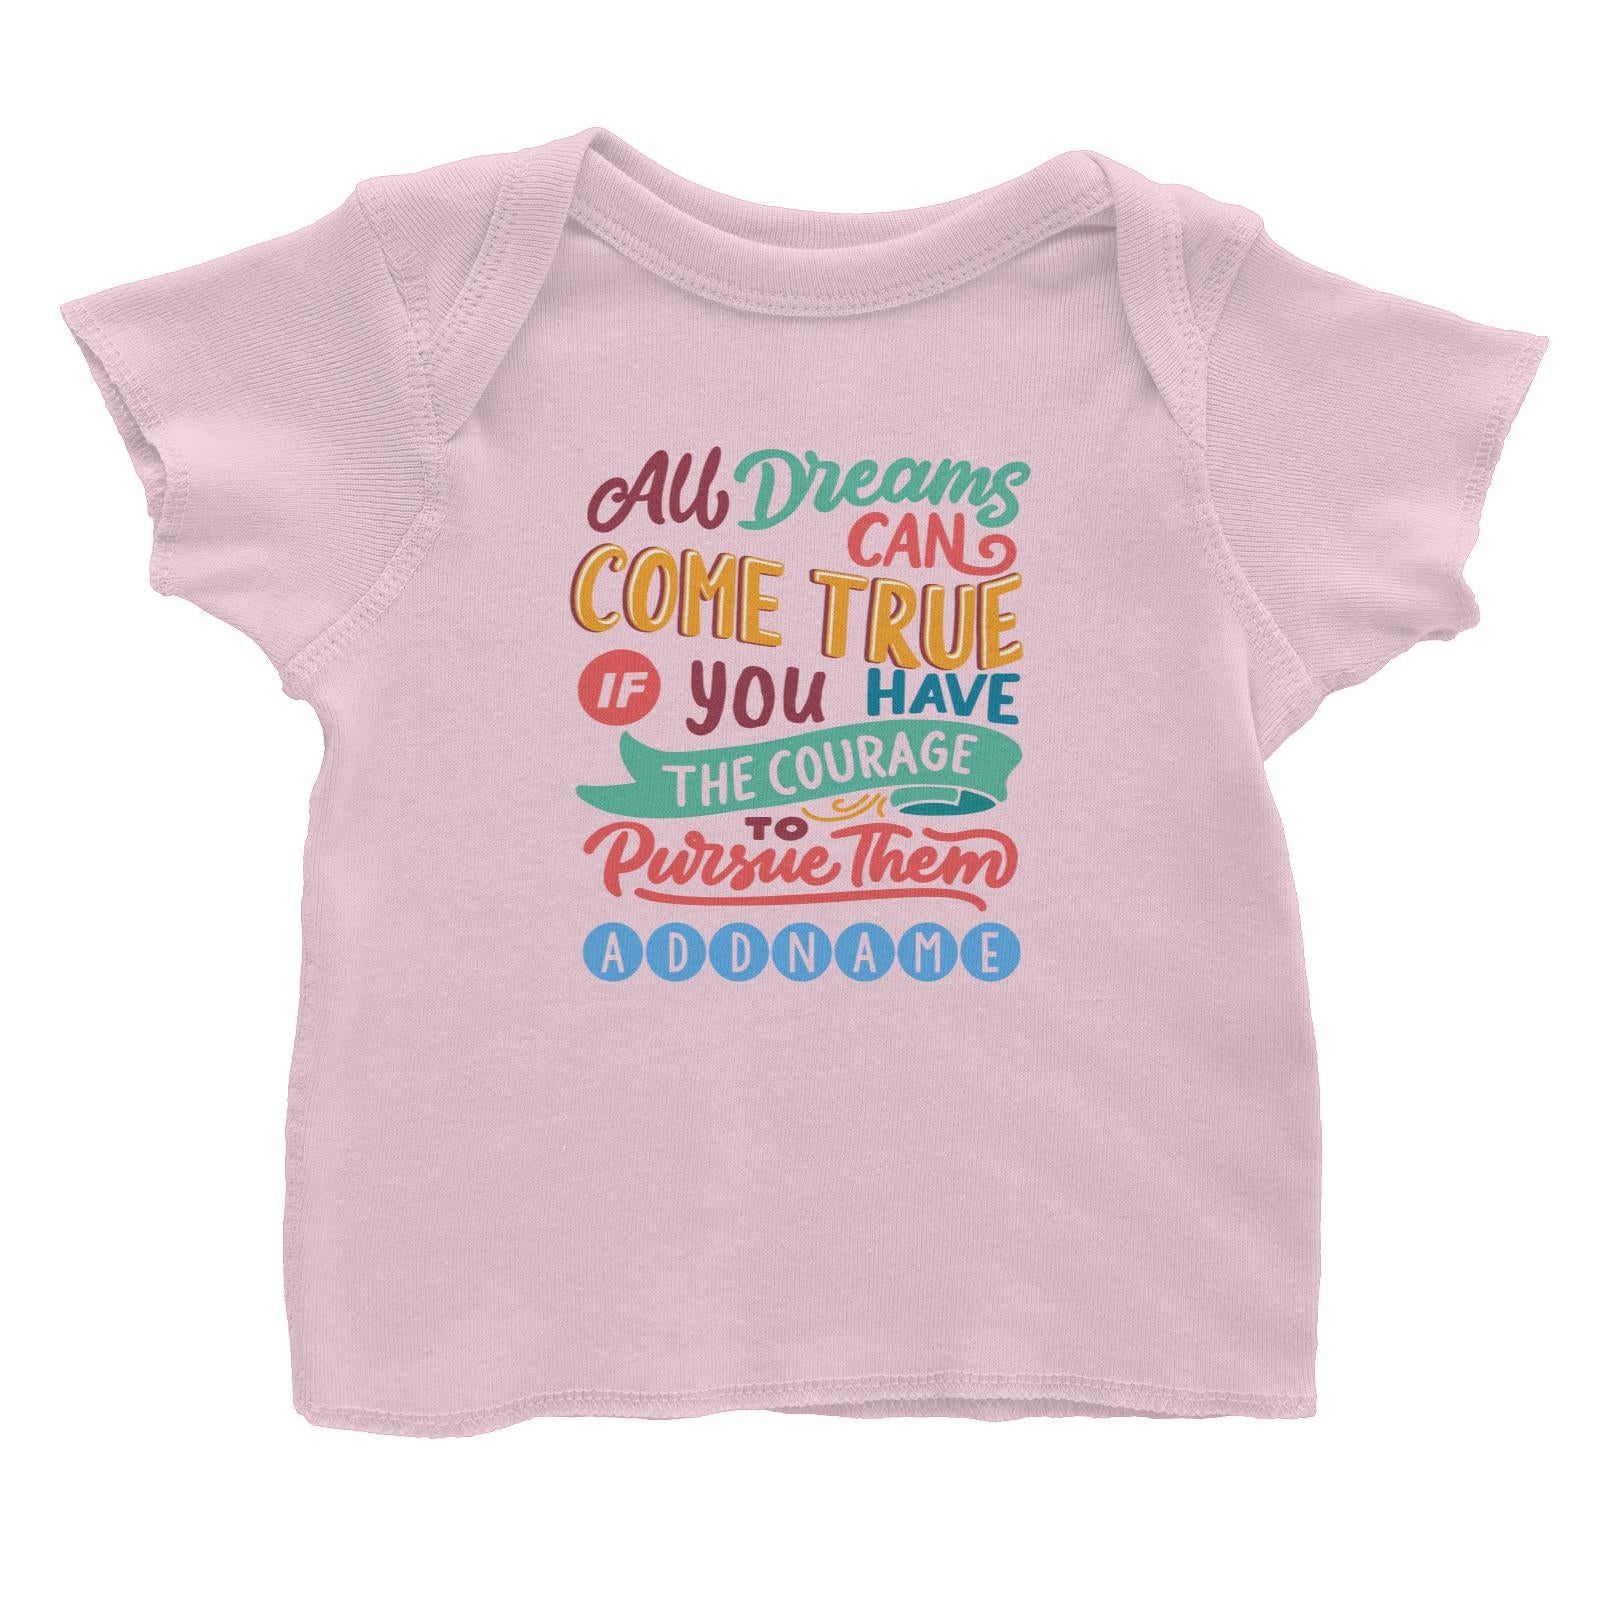 Children's Day Gift Series All Dreams Can Come True Addname Baby T-Shirt